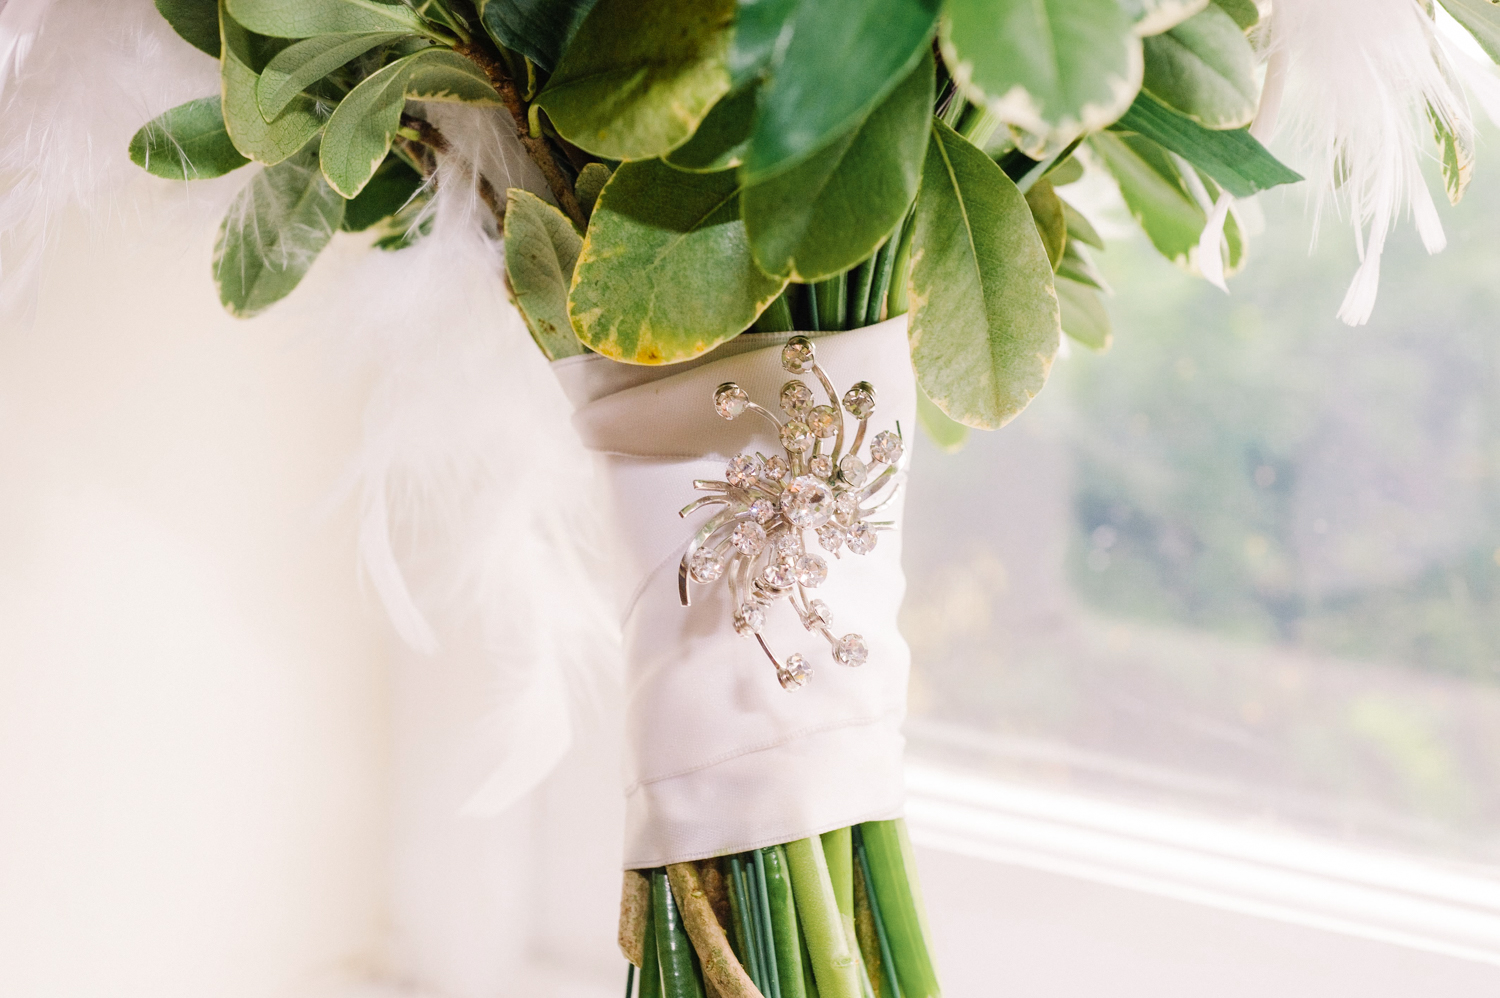 Honoring lost loved ones on your wedding day with heirloom brooches